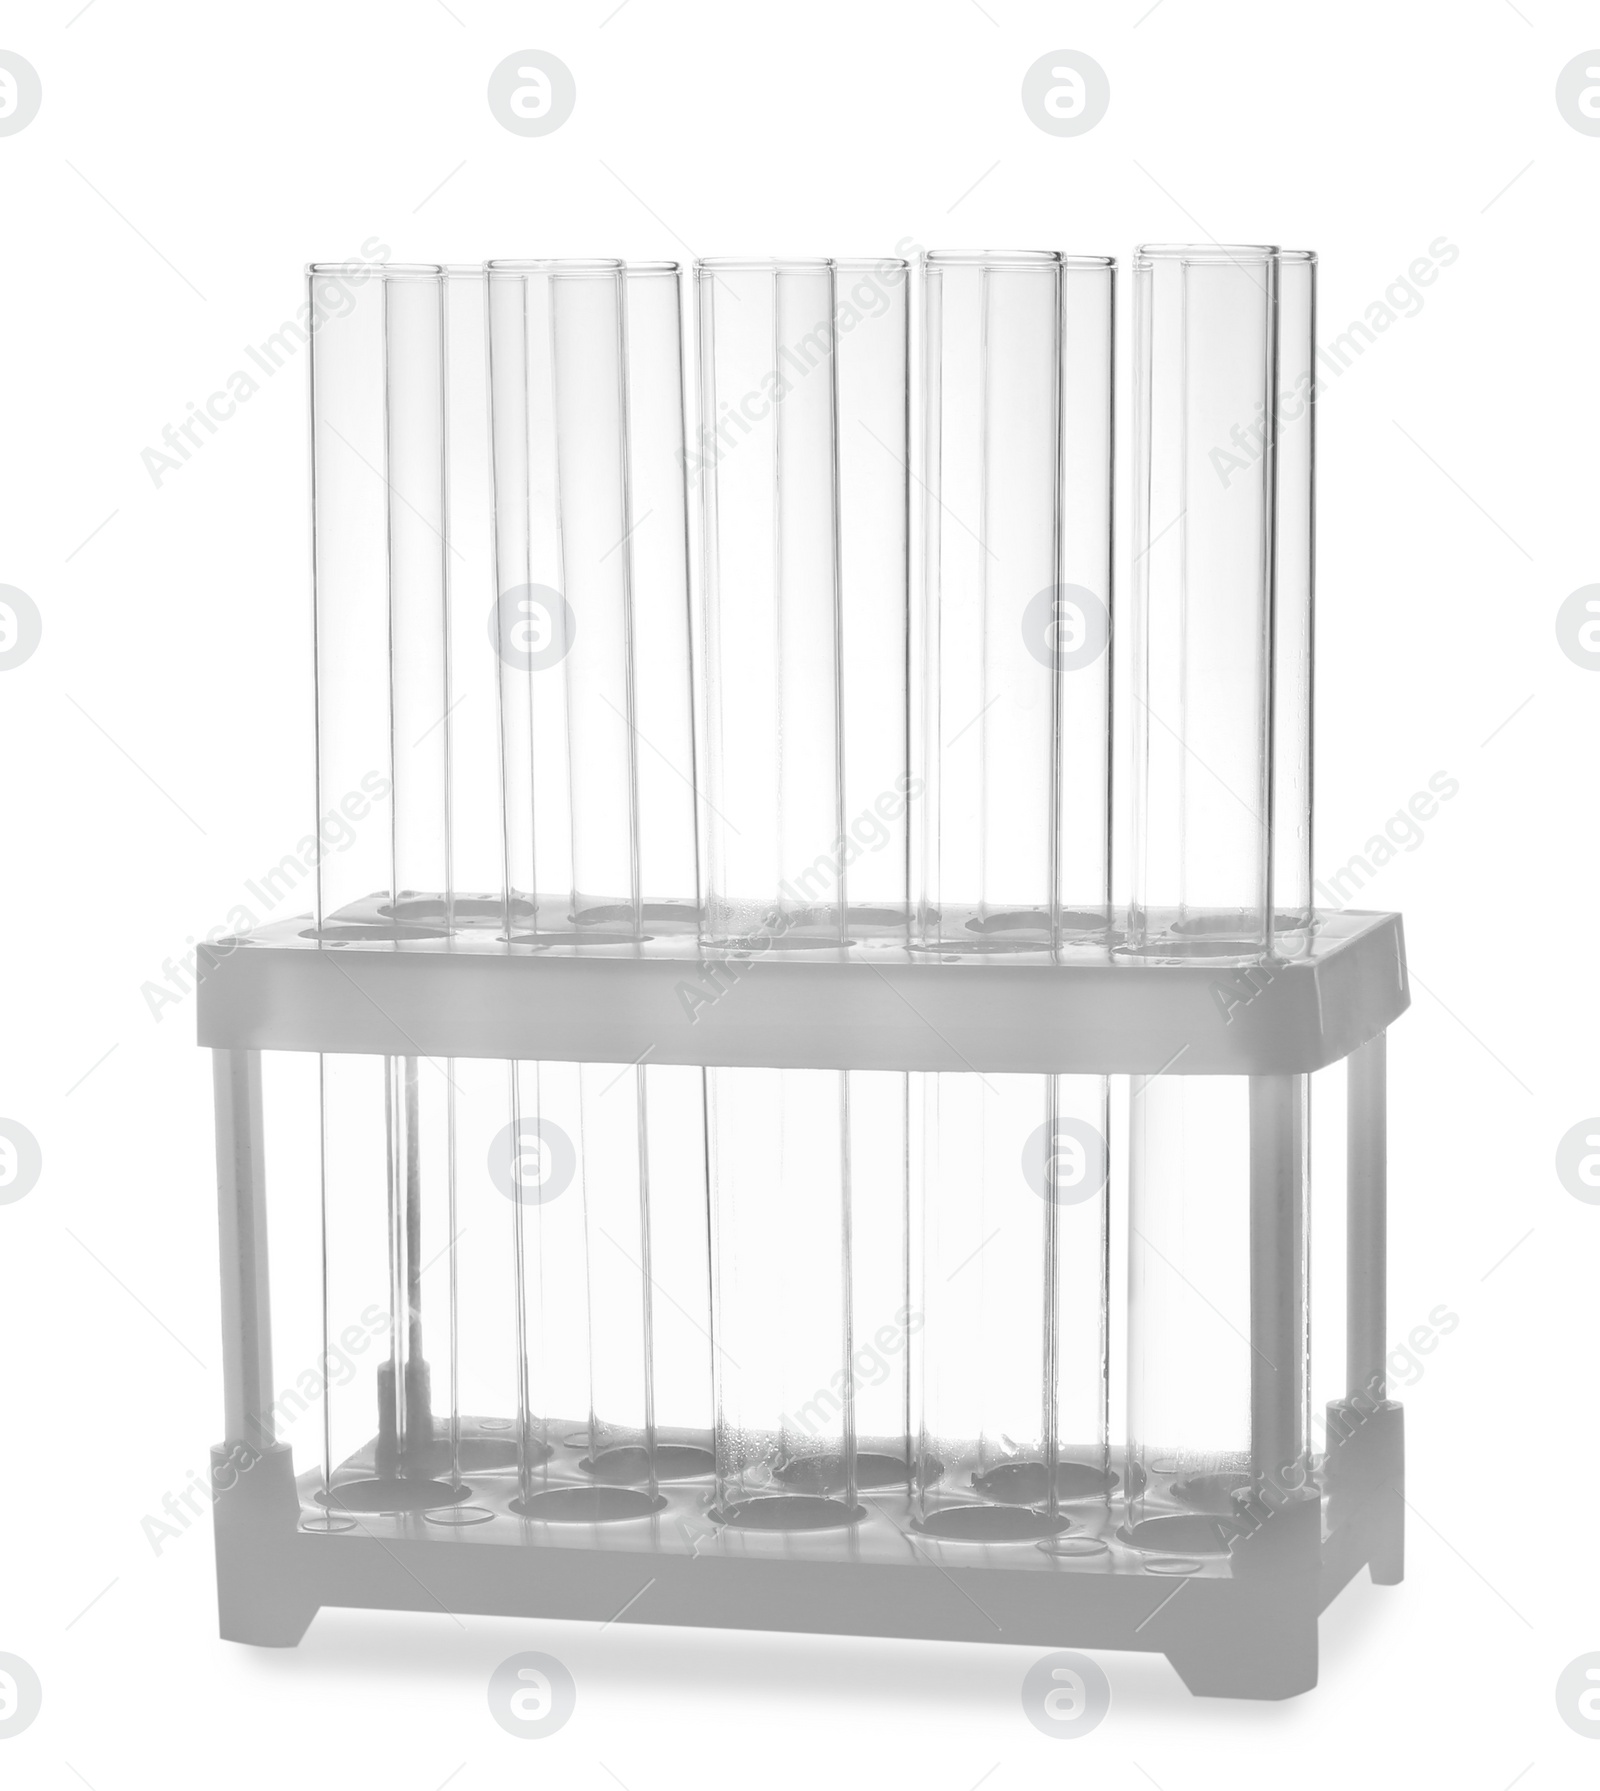 Photo of Empty test tubes in rack isolated on white. Laboratory glassware